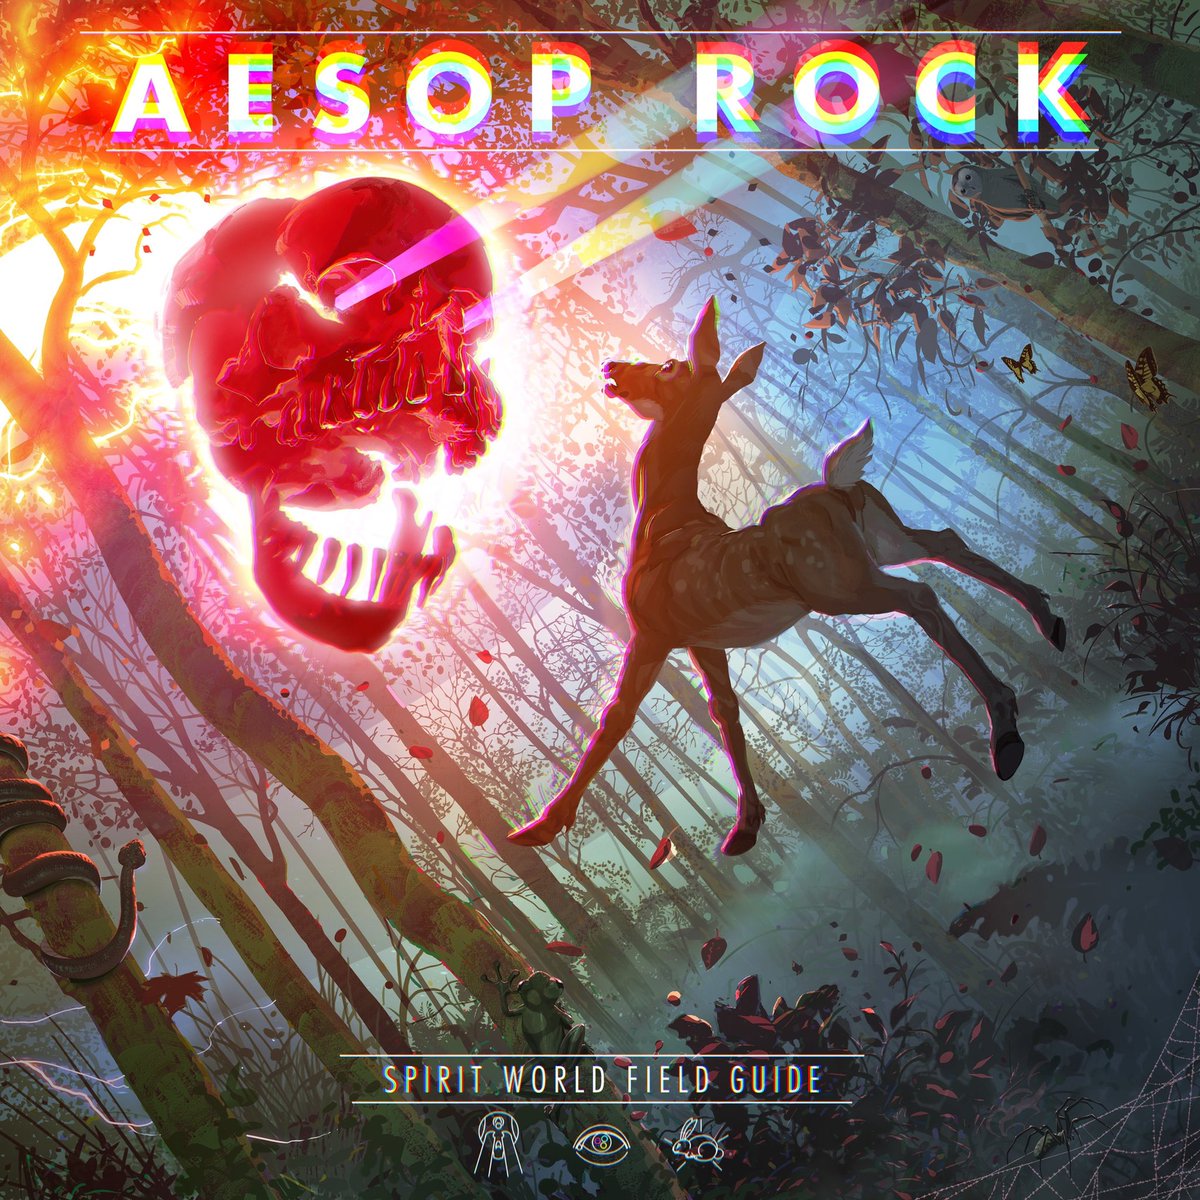 11. Aesop Rock - Spirit World Field Guide (I haven’t cared about Aesop Rock in like 15 years but this record is maybe his best. It’s weird of course but not too nuts, just insane rapping)